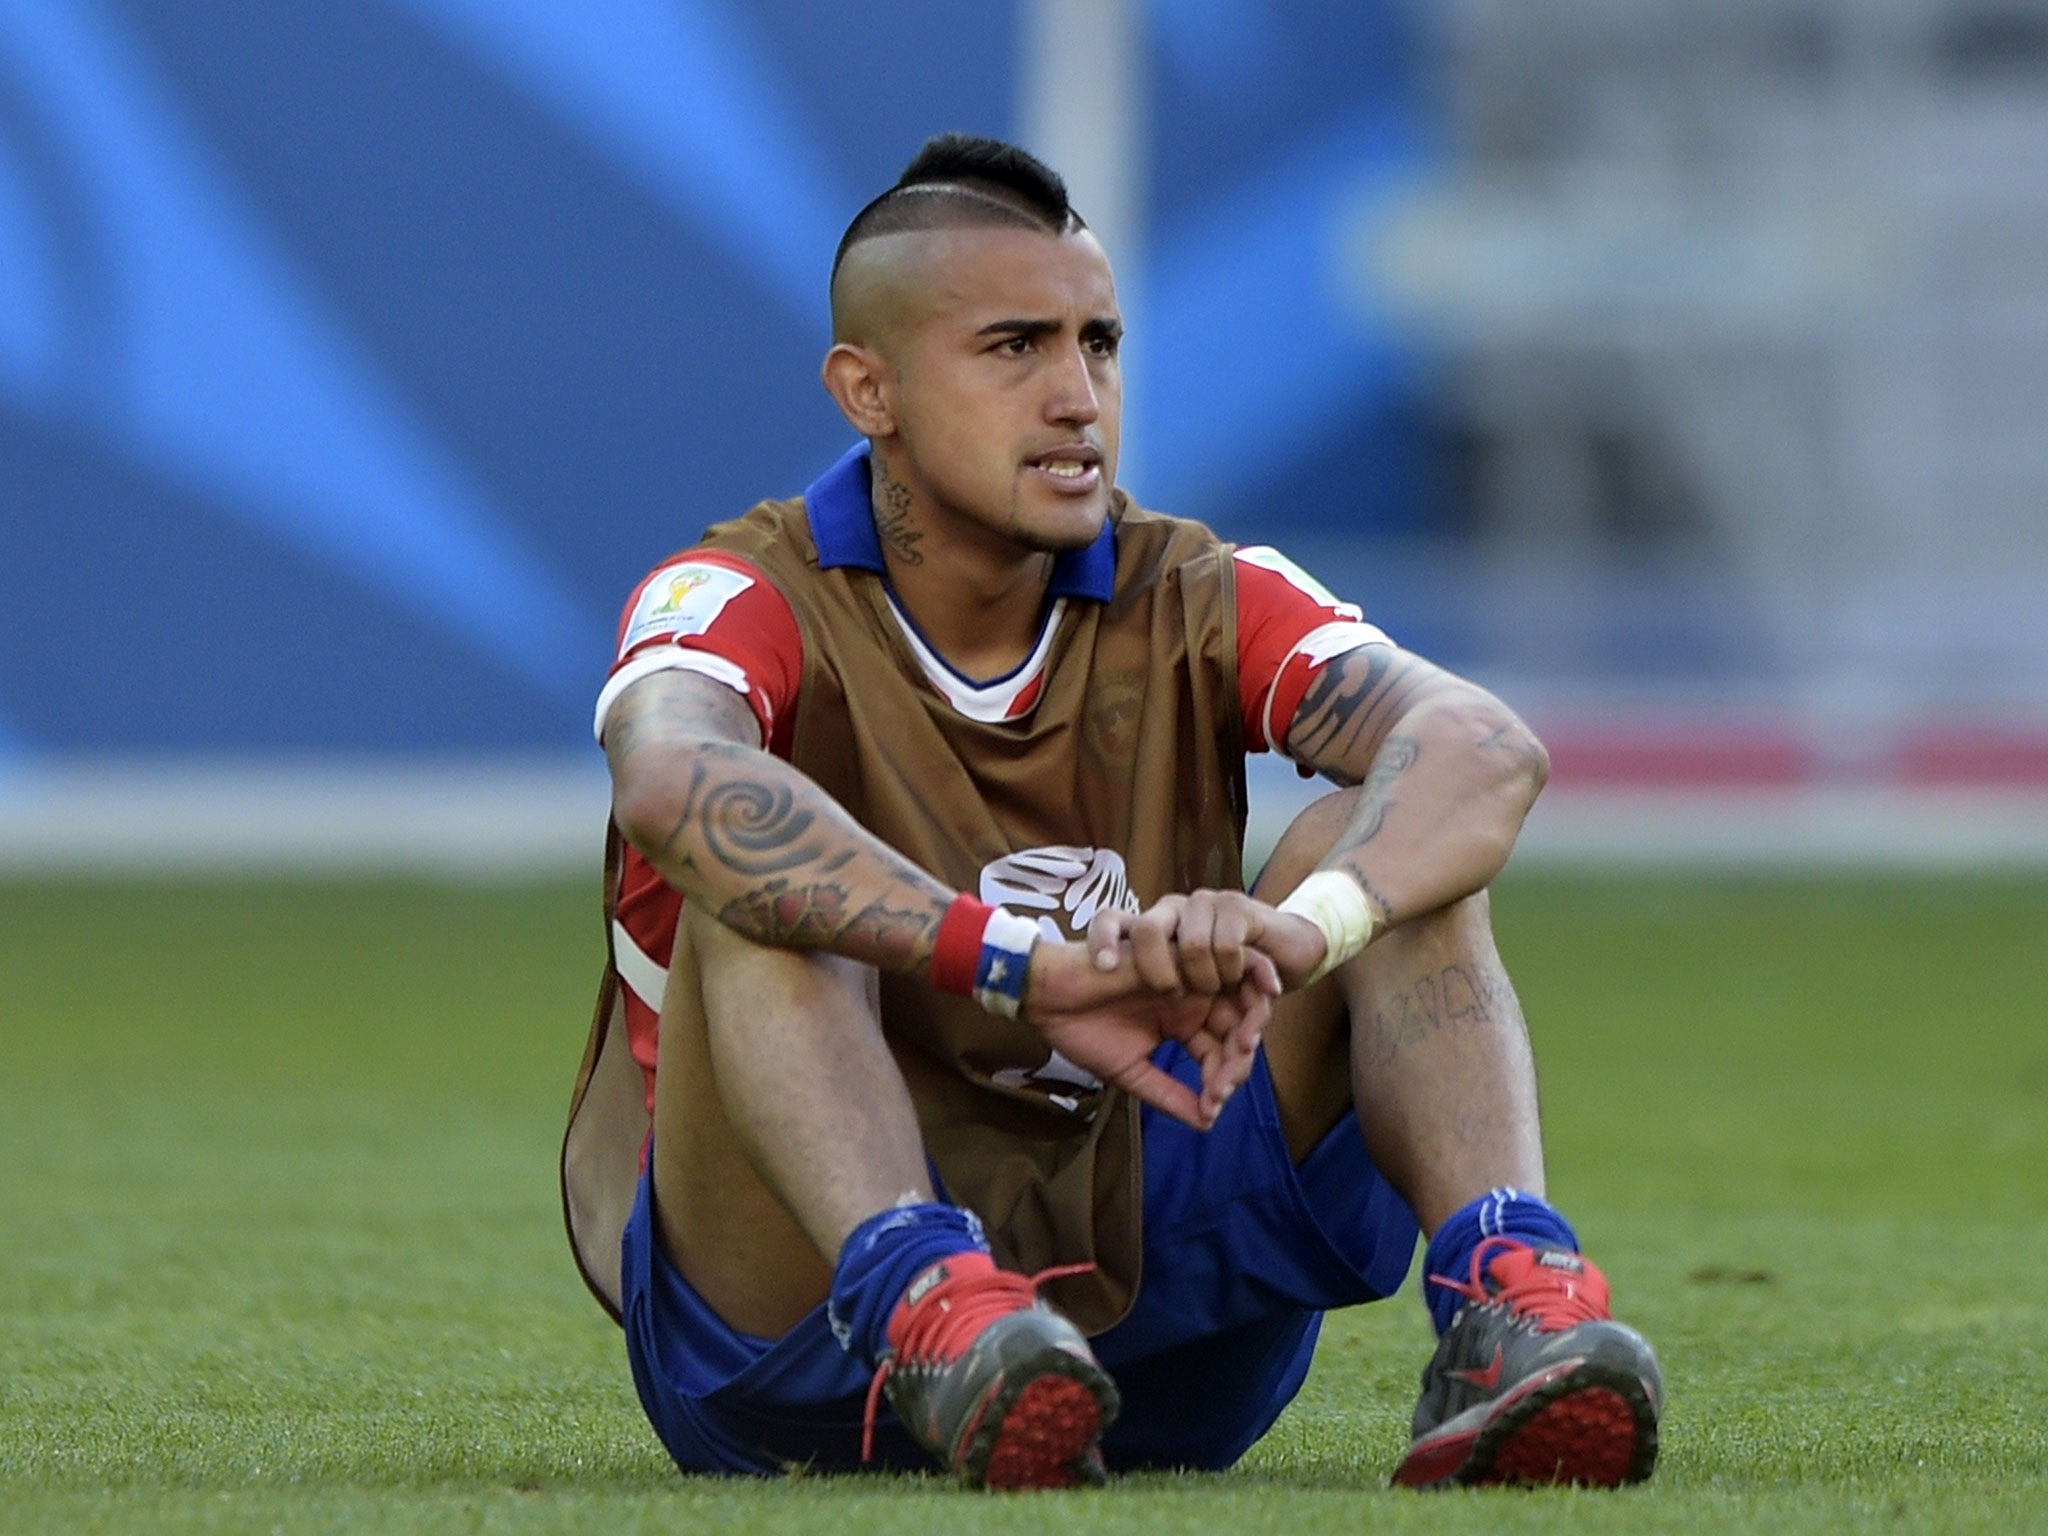 Chile's midfielder Arturo Vidal reacts after losing their match against Brazil in a penalty shoot out after extra-time in the Round of 16 football match between Brazil and Chile